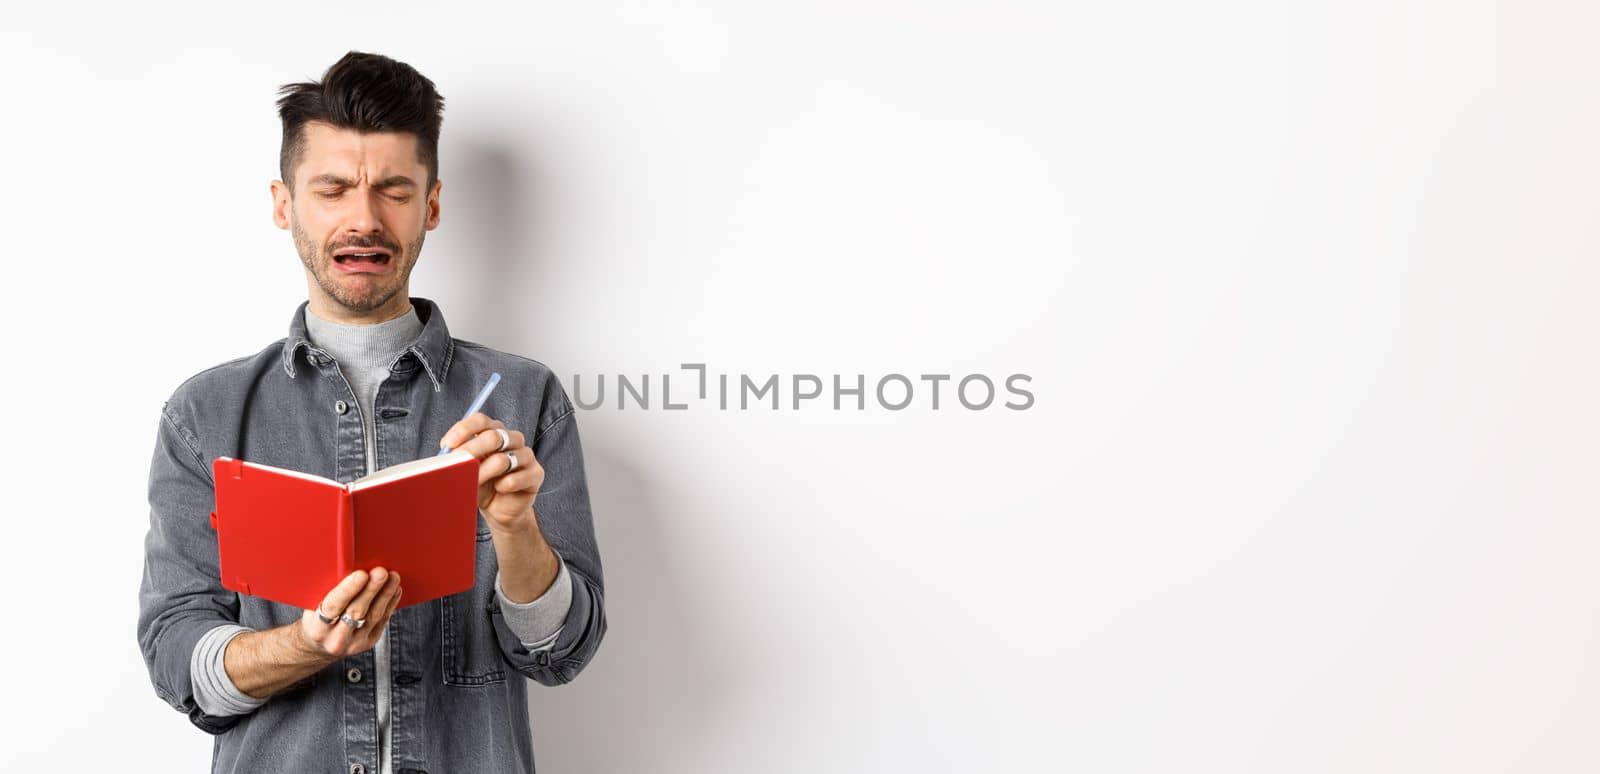 Sad crying guy writing in his diary with miserable face, look distressed while making notes in journal or planner, standing against white background.